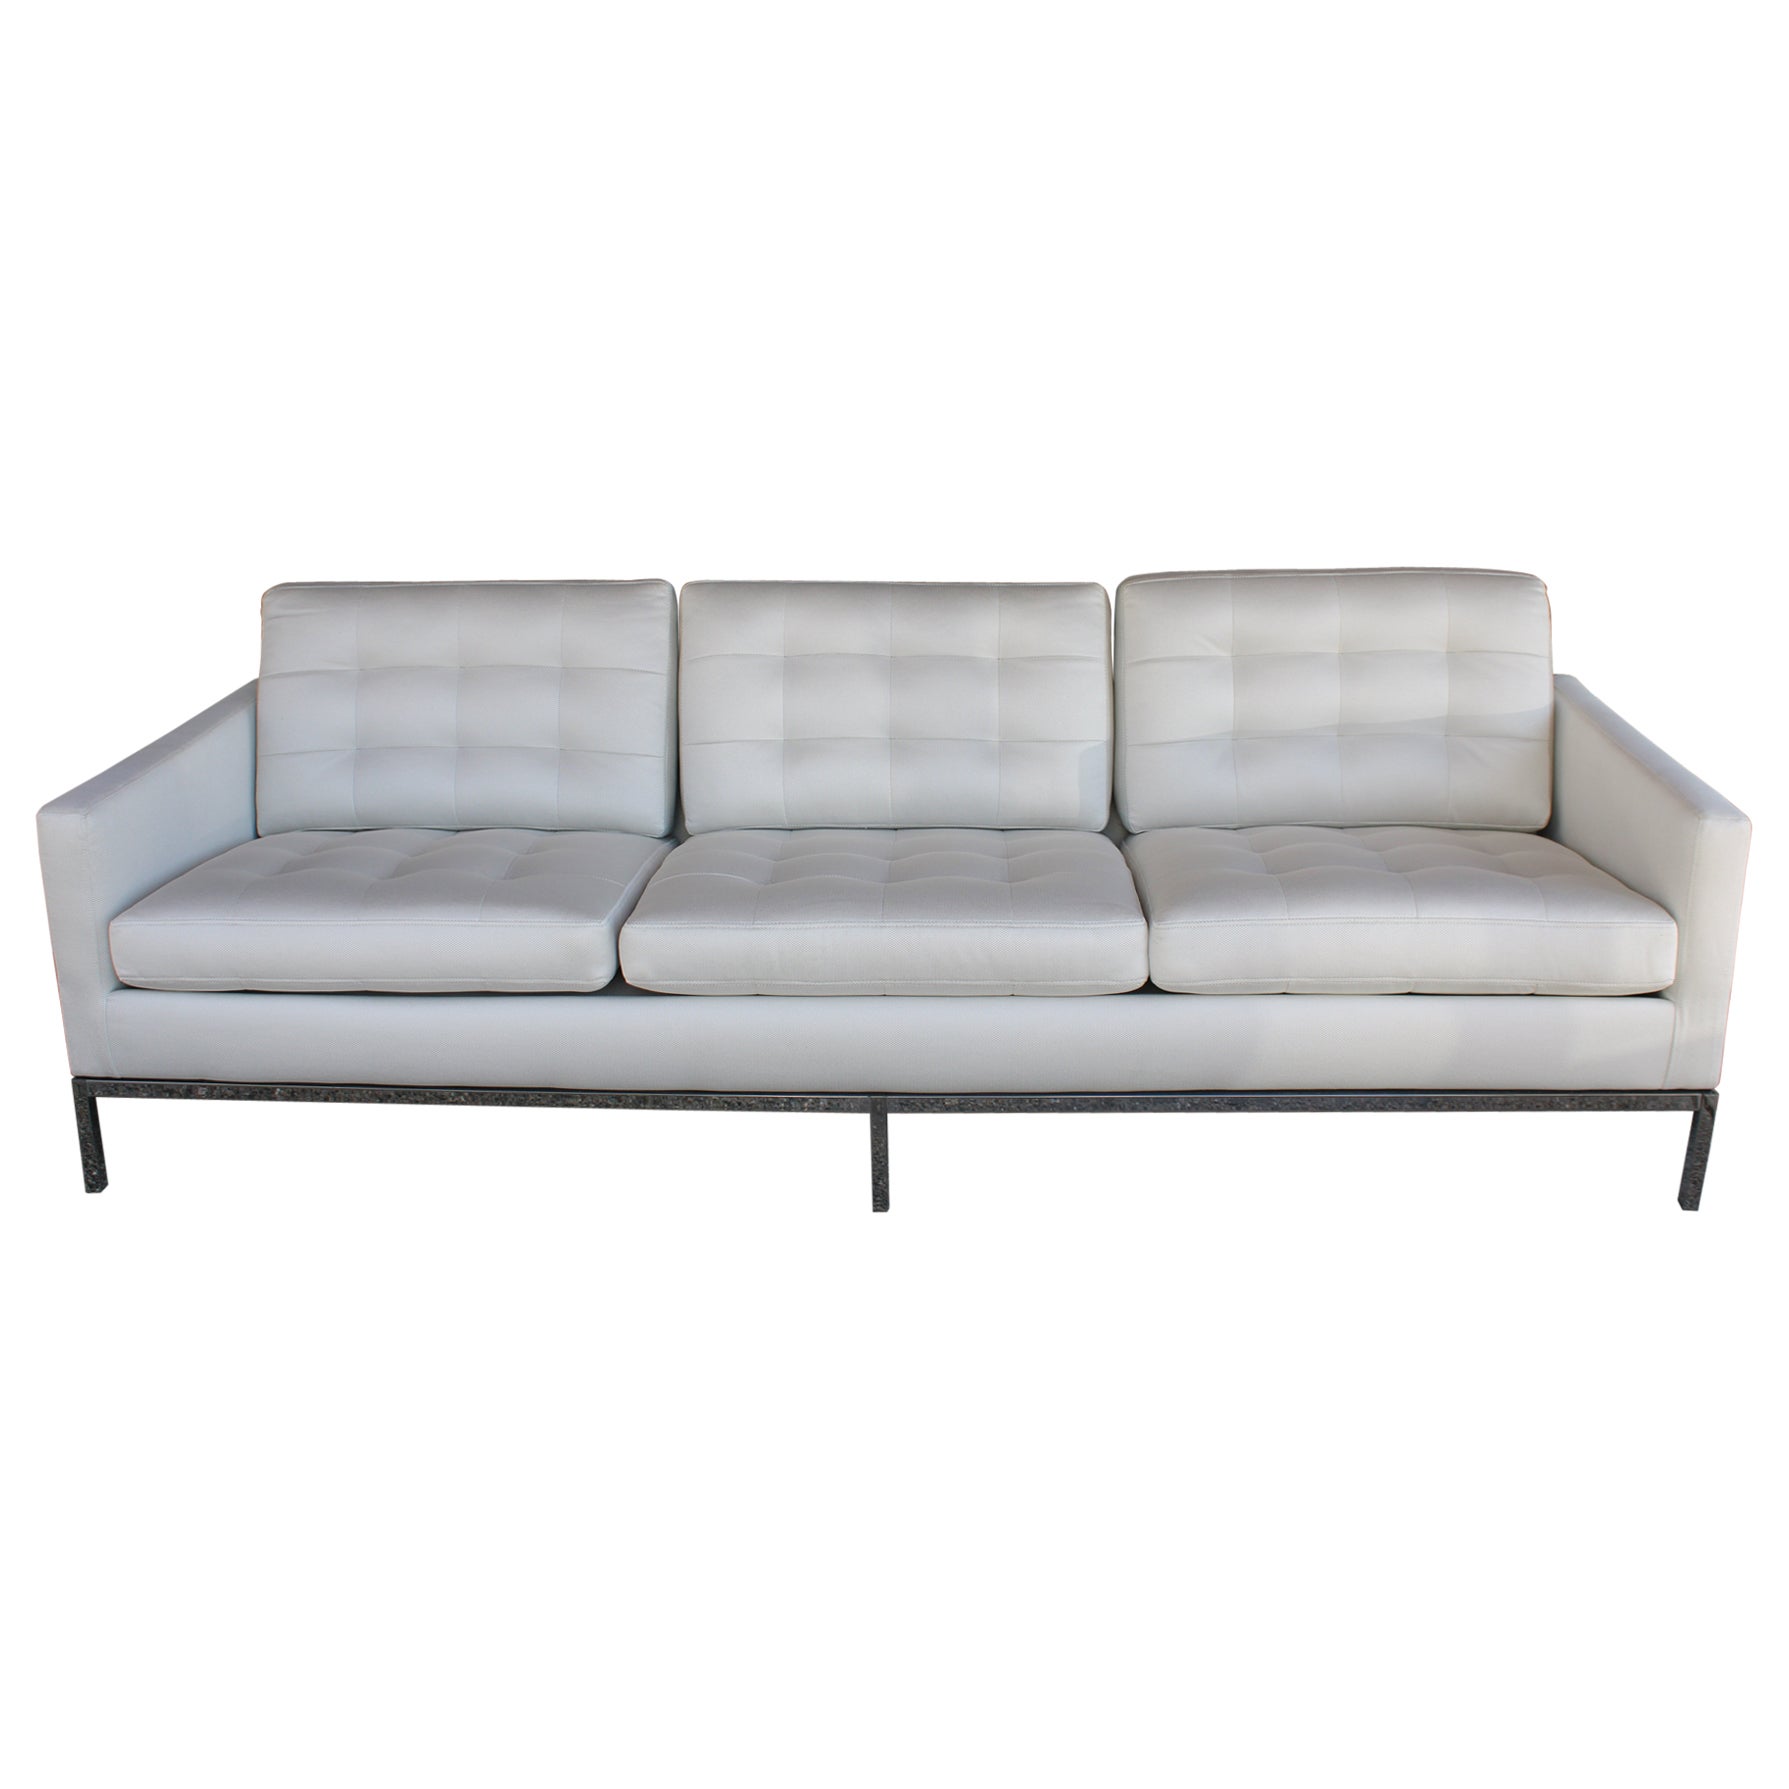 Knoll Associates Couch, Park Avenue, New York, Made in Italy For Sale